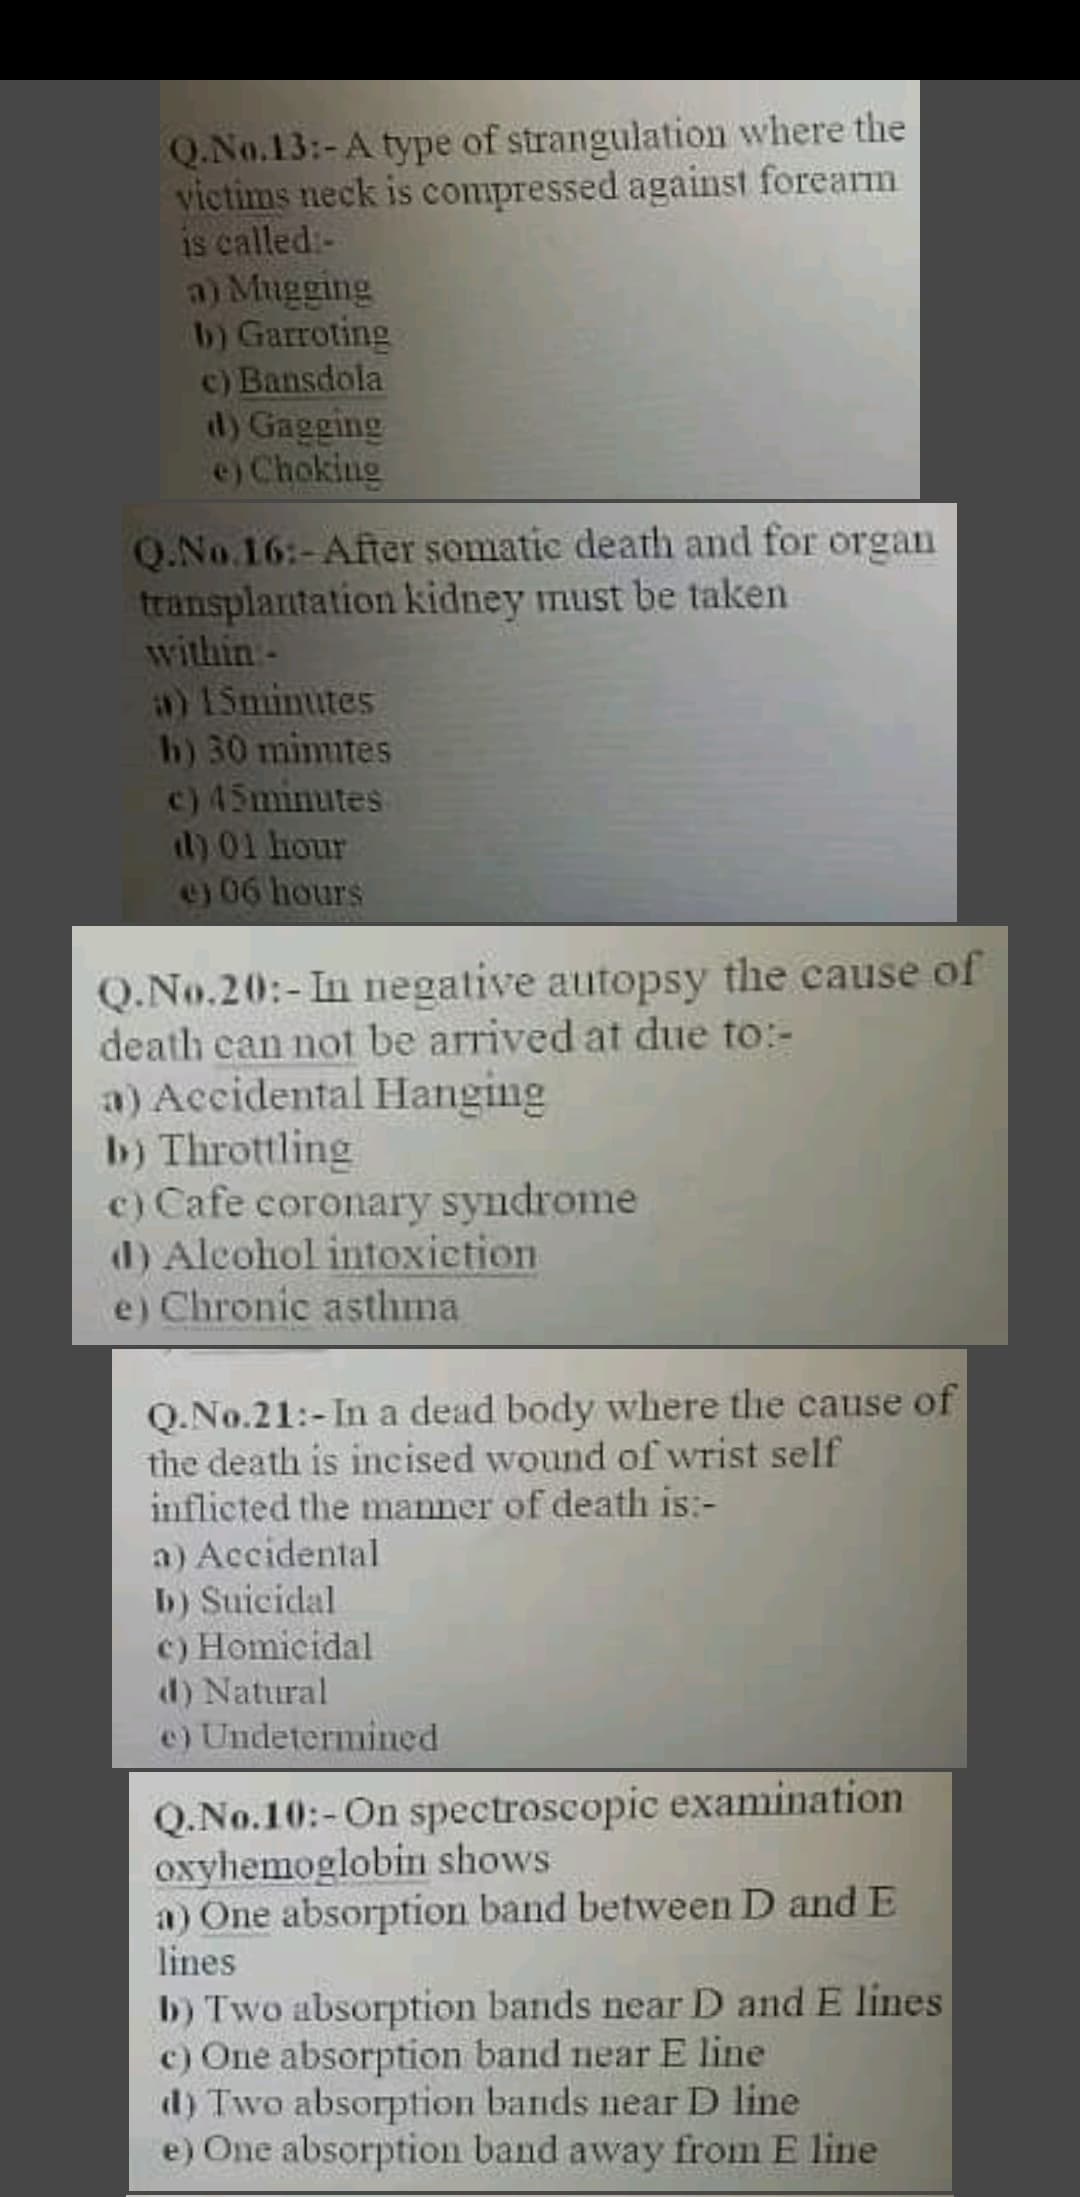 Q.No.13:-A type of strangulation where the
victims neck is compressed against forearm
is called:-
a) Mugging
b) Garroting
c) Bansdola
id) Gagging
e) Choking
O.No.16:-After somatic death and for organ
transplantation kidney must be taken
within -
a) 15minutes
h) 30 mimites
c) 45minutes
d) 01 hour
e) 06 hours
Q.No.20:-In negative autopsy the cause of
death can not be arrived at due to:-
a) Accidental Hanging
b) Throttling
c) Cafe coronary syndrome
d) Alcohol intoxietion
e) Chronic asthma
Q.No.21:-In a dead body where the cause of
the death is incised wound of wrist self
inflicted the manner of death is:-
a) Accidental
b) Suicidal
c) Homicidal
d) Natural
e) Undetermined
Q.No.10:-On spectroscopic examination
oxyhemoglobin shows
a) One absorption band betwveen D and E
lines
b) Two absorption bands near D and E lines
c) One absorption band near E line
d) Two absorption bands near D line
e) One absorption band away from E line
